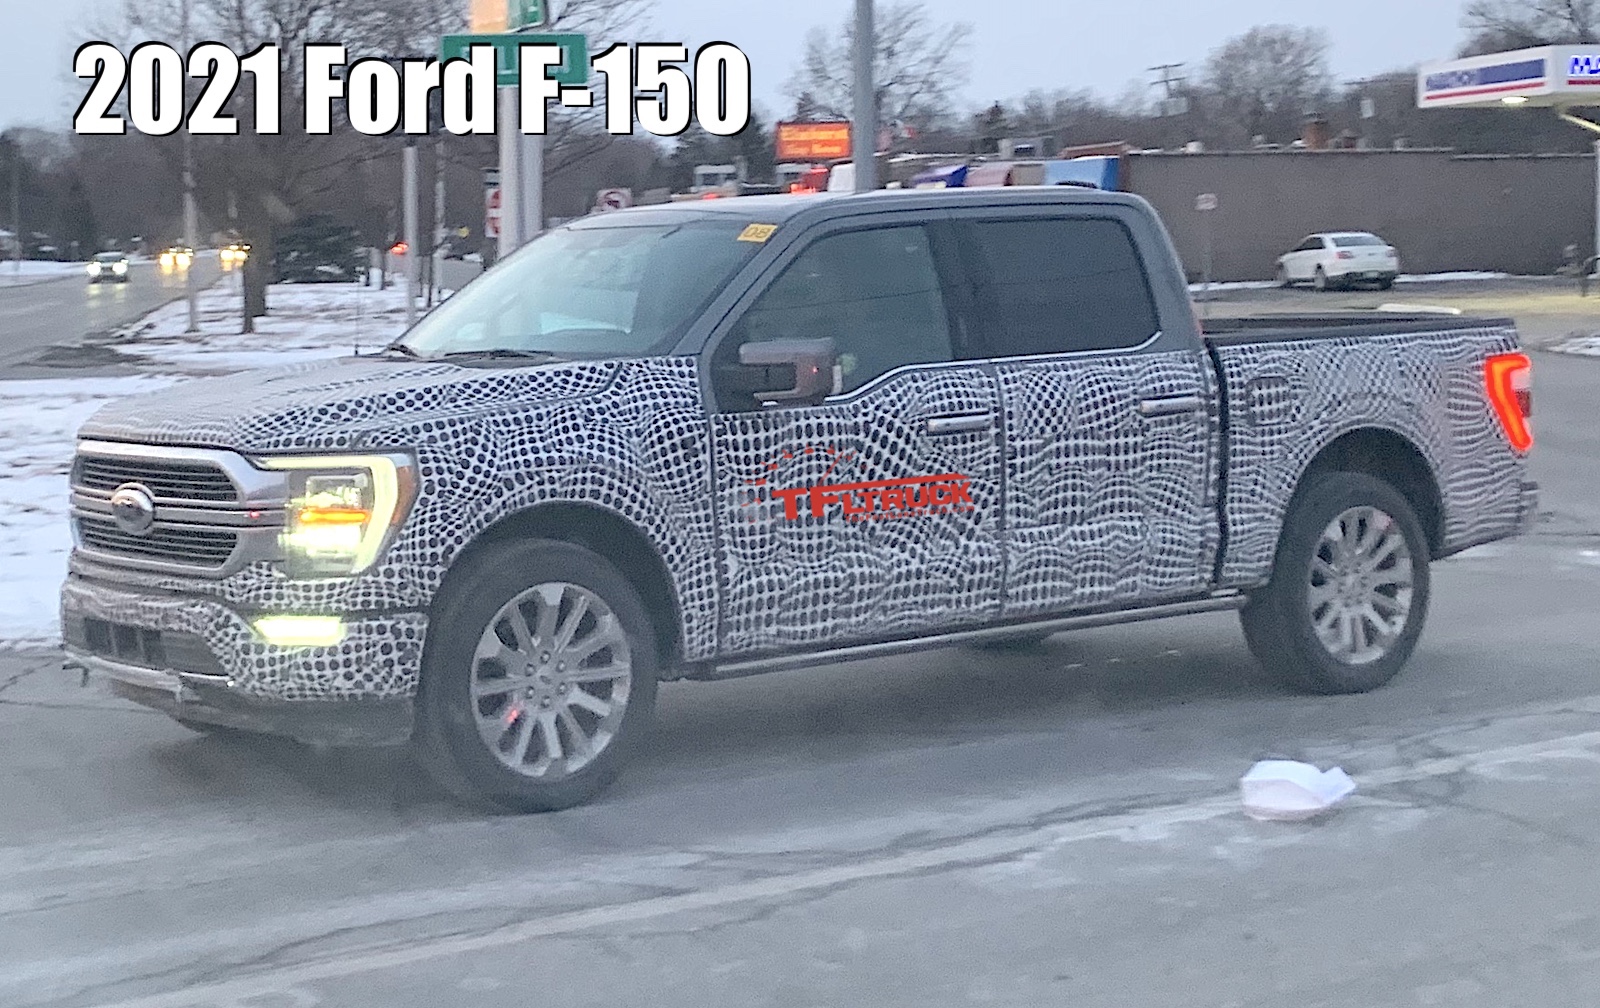 2021 Ford F 150 When Will It Be Officially Revealed The Fast